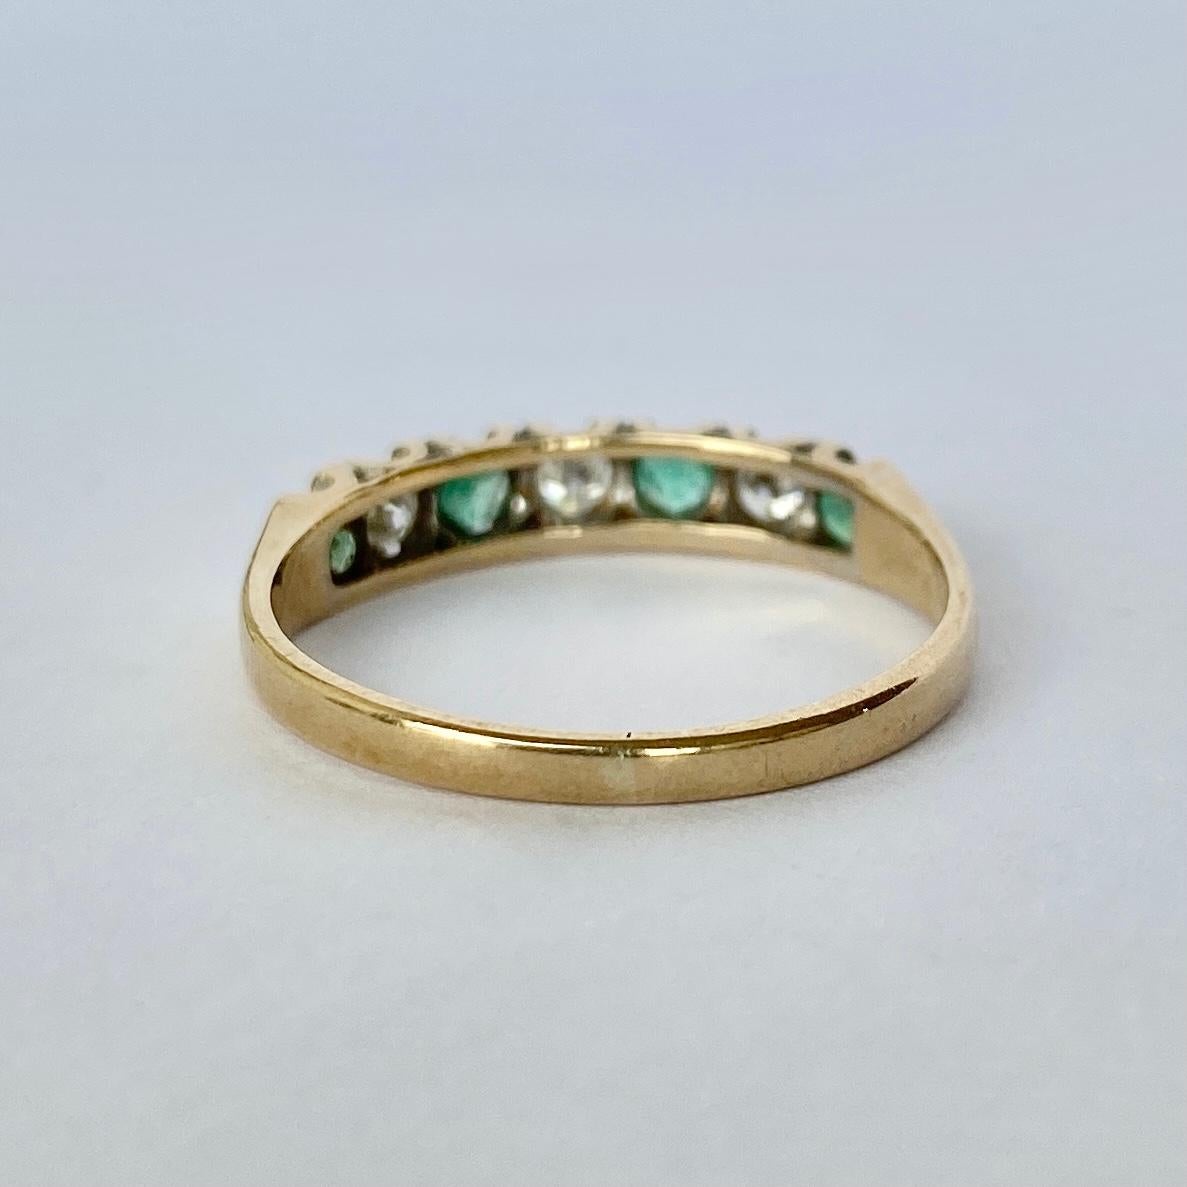 The emeralds in this ring are beautiful and bright and measure 8pts each. In between the gorgeous green stones are diamonds also measuring 8pts each. The ring is modelled in 9carat gold and hallmarked Birmingham 1973.

Ring Size: P or 7 3/4 
Band